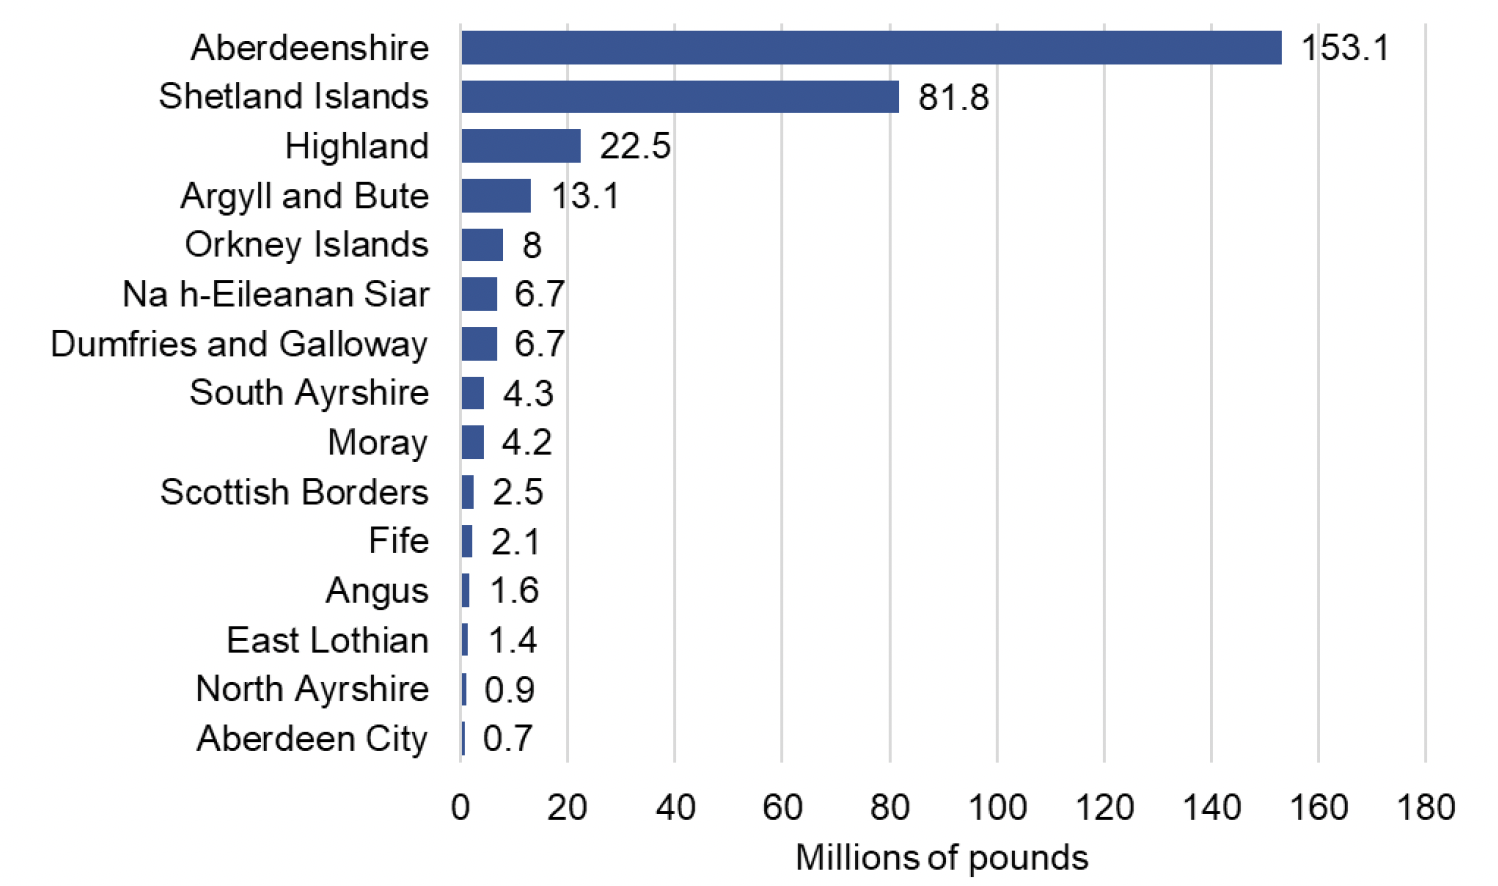 Bar chart showing fishing GVA by local authority, 2021. Aberdeenshire had the highest fishing GVA at £153 million, followed by Shetland Islands at £82 million.